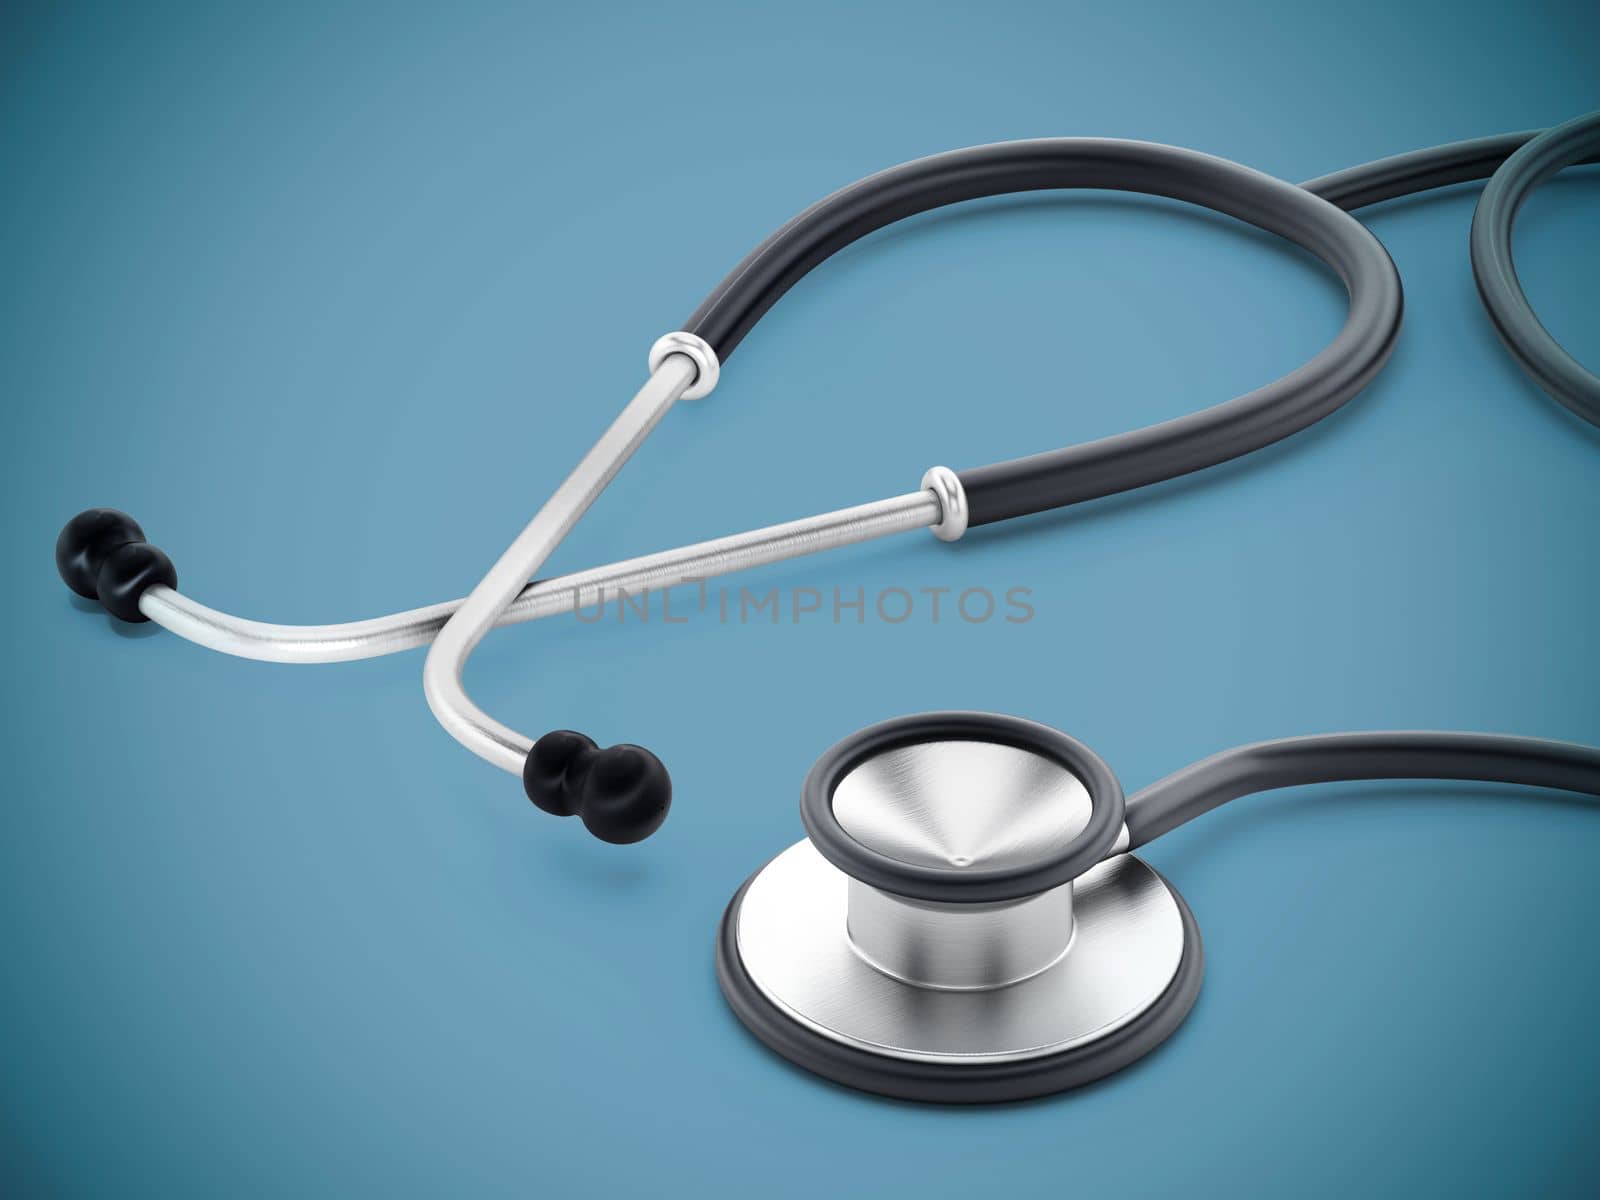 Stethoscope standing on blue surface. 3D illustration by Simsek